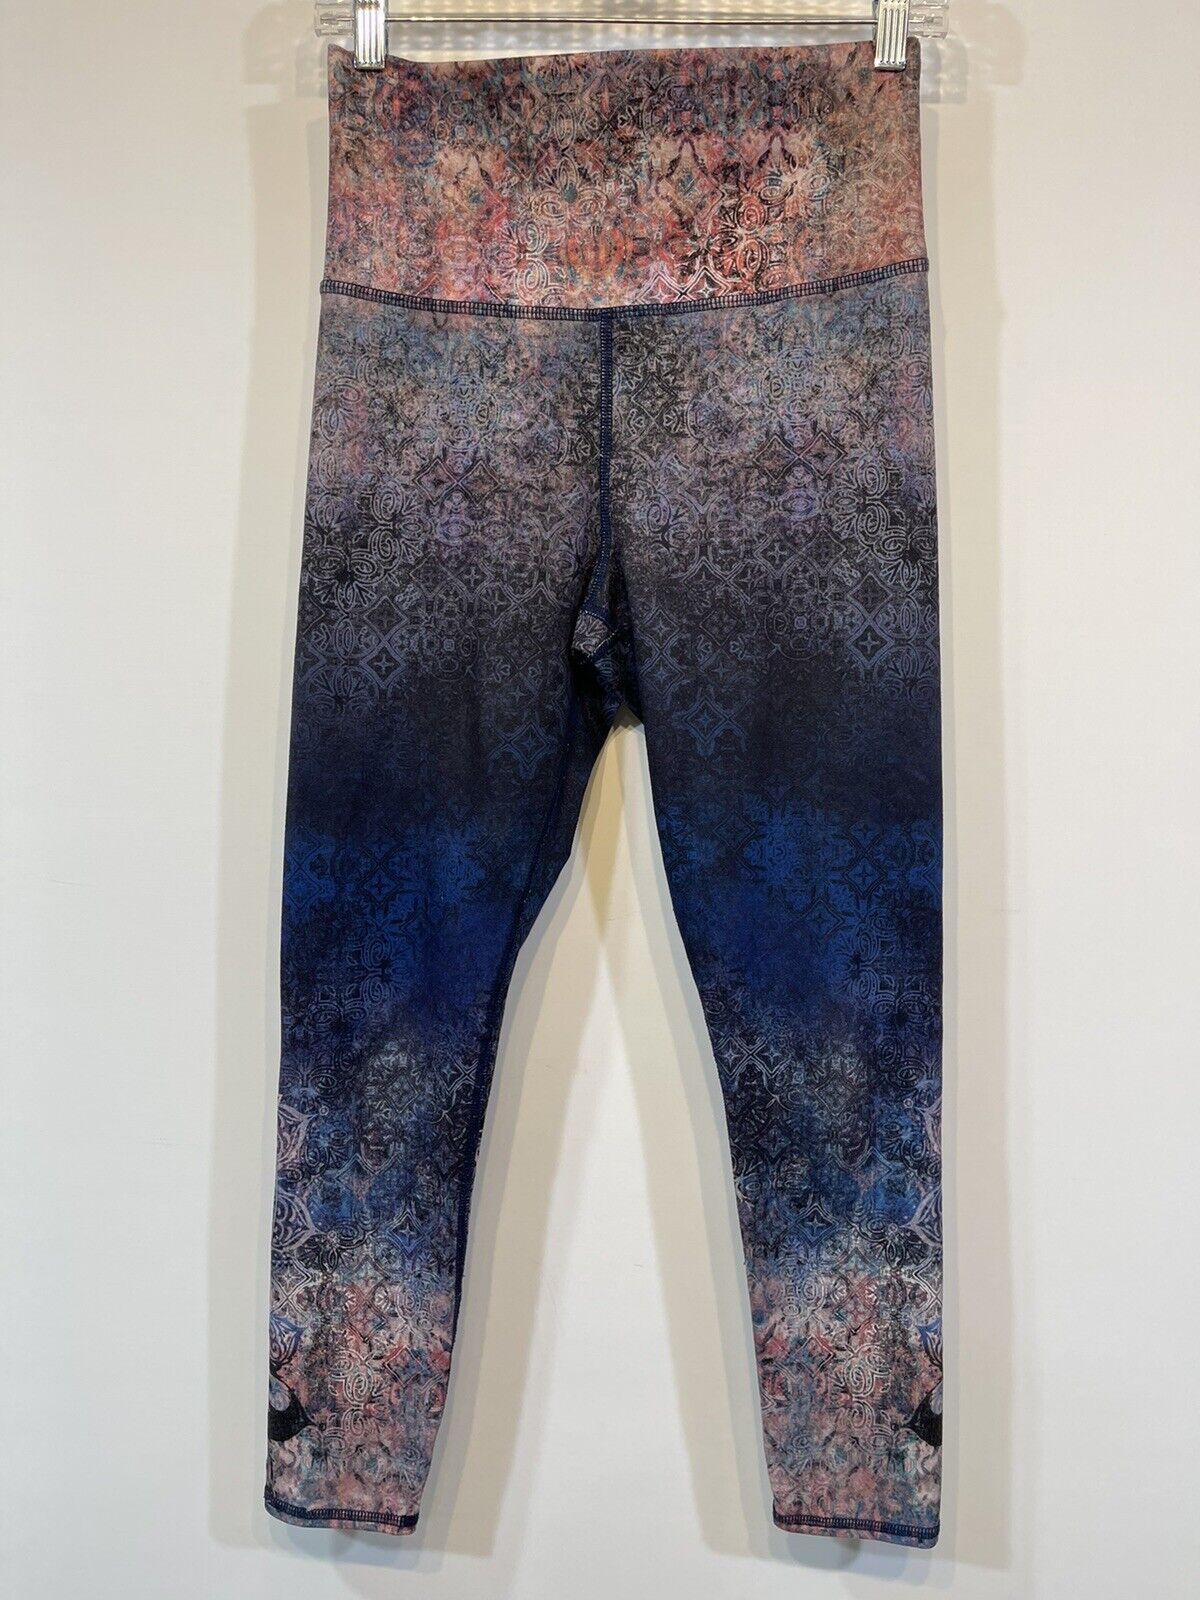 Evolution and Creation Womens Leggings Xs for Sale in Phoenix, AZ